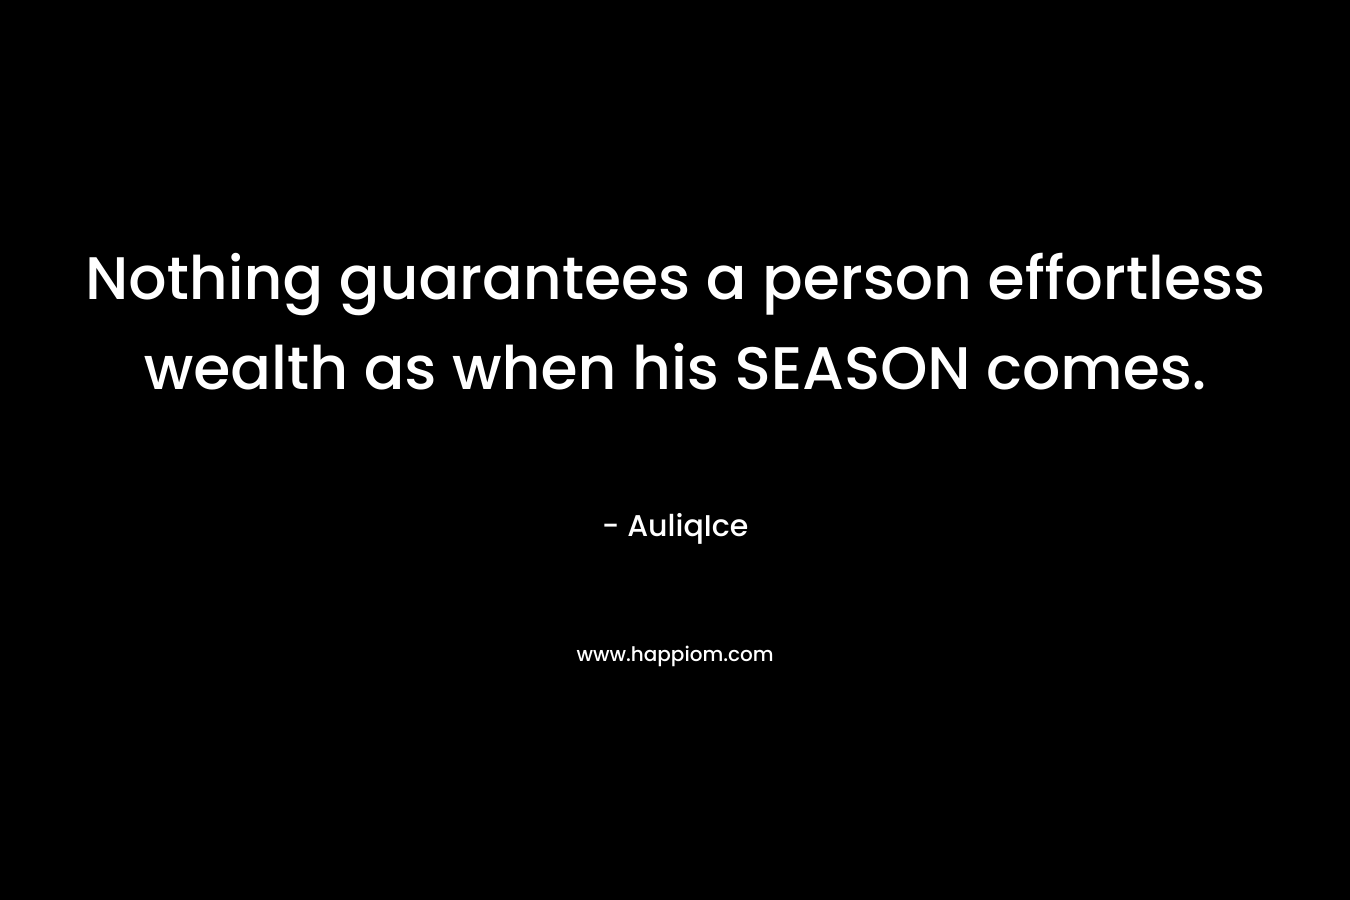 Nothing guarantees a person effortless wealth as when his SEASON comes.